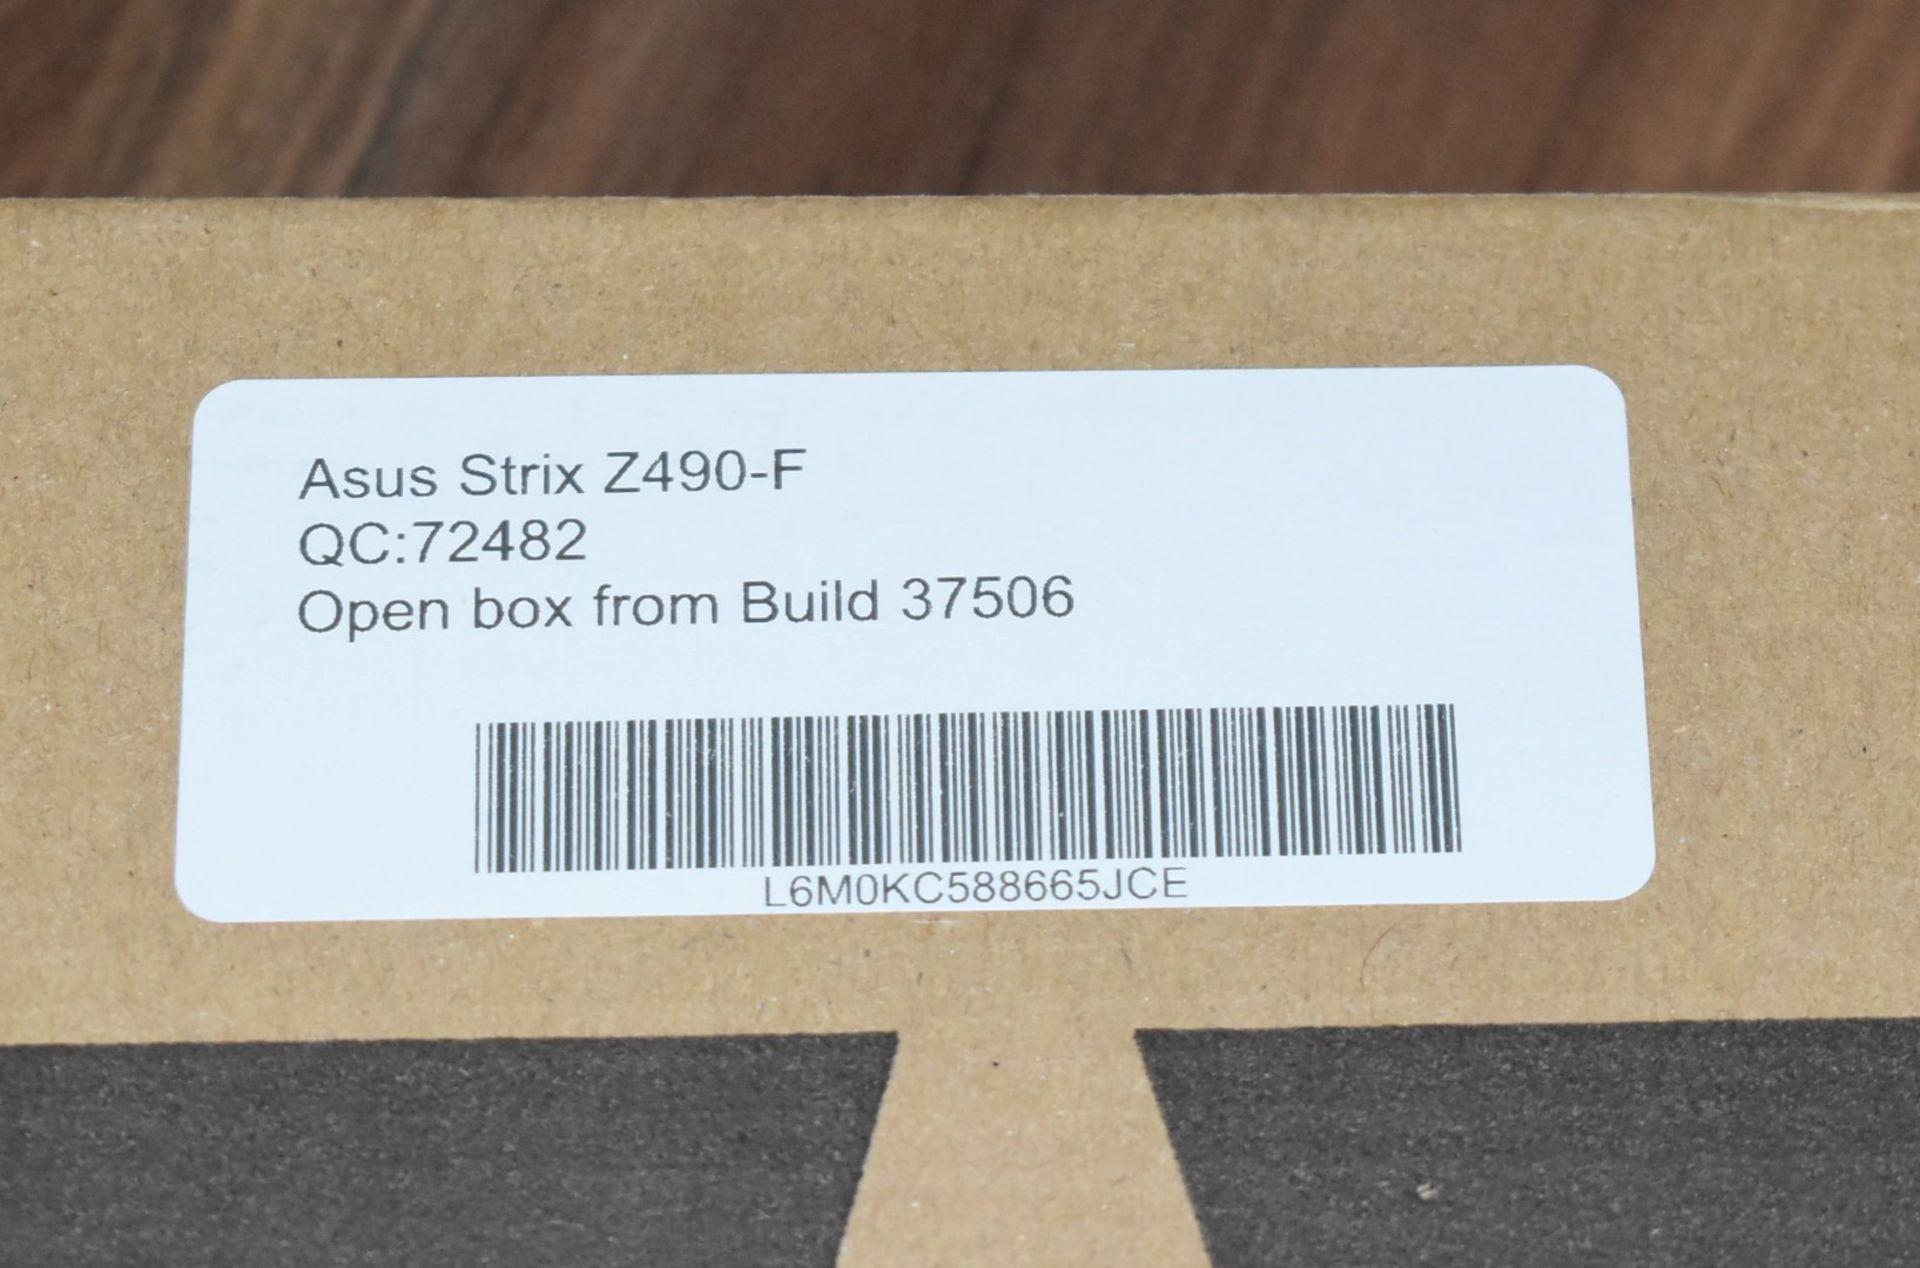 1 x Asus Strix Z490-F Intel LGA1200 Gaming Motherboard - Open Boxed Stock With Accessories - Image 2 of 3